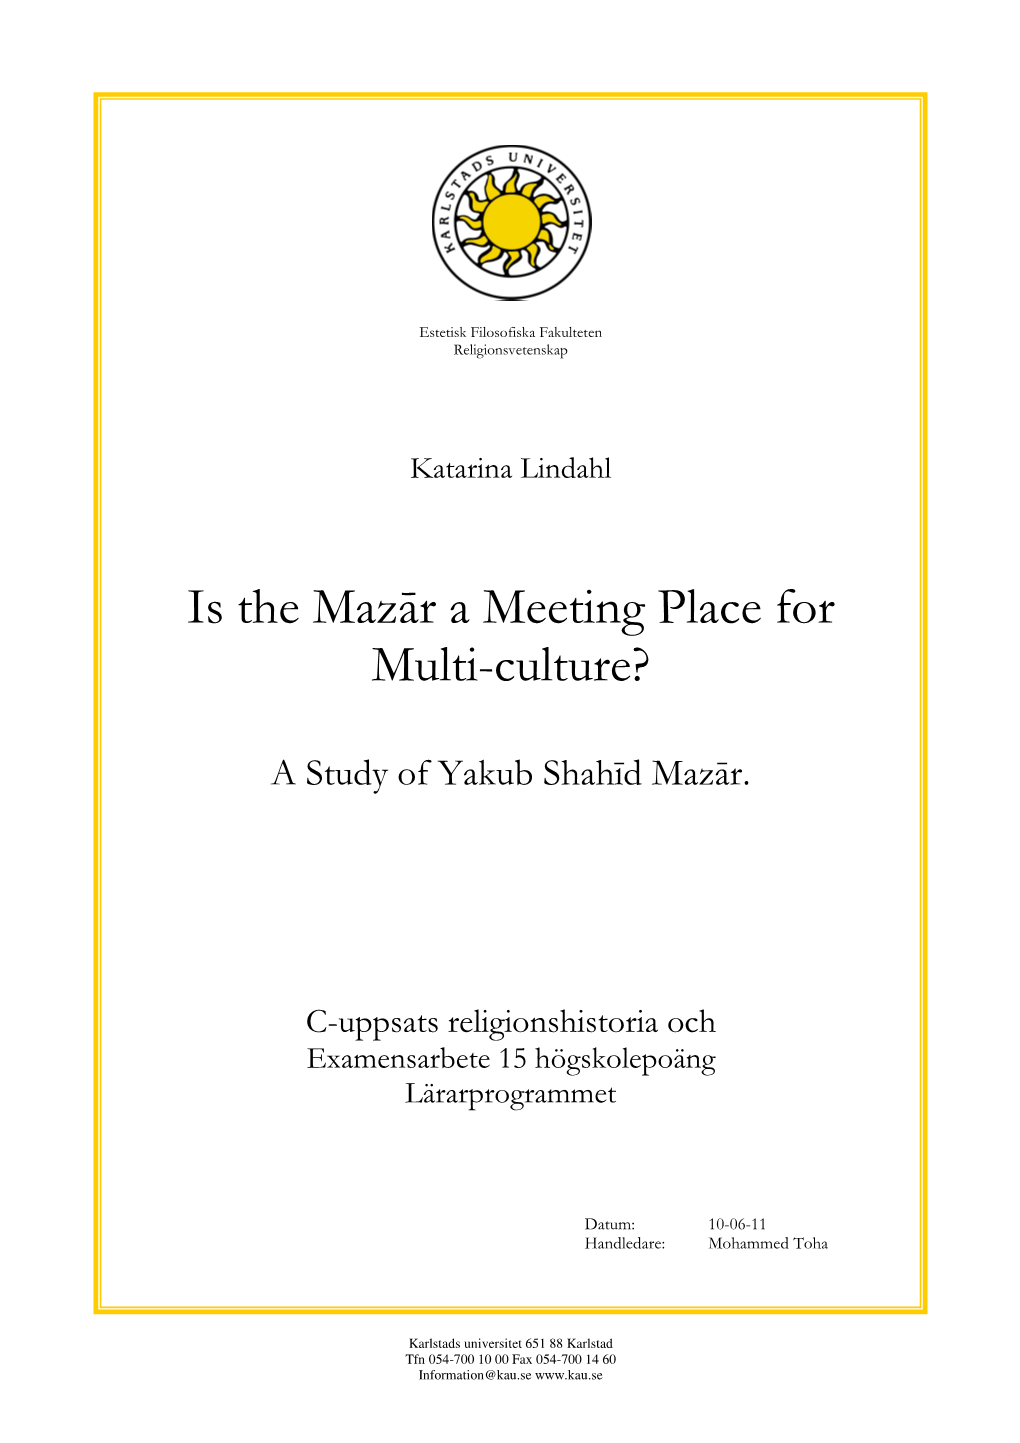 Is the Mazār a Meeting Place for Multi-Culture?